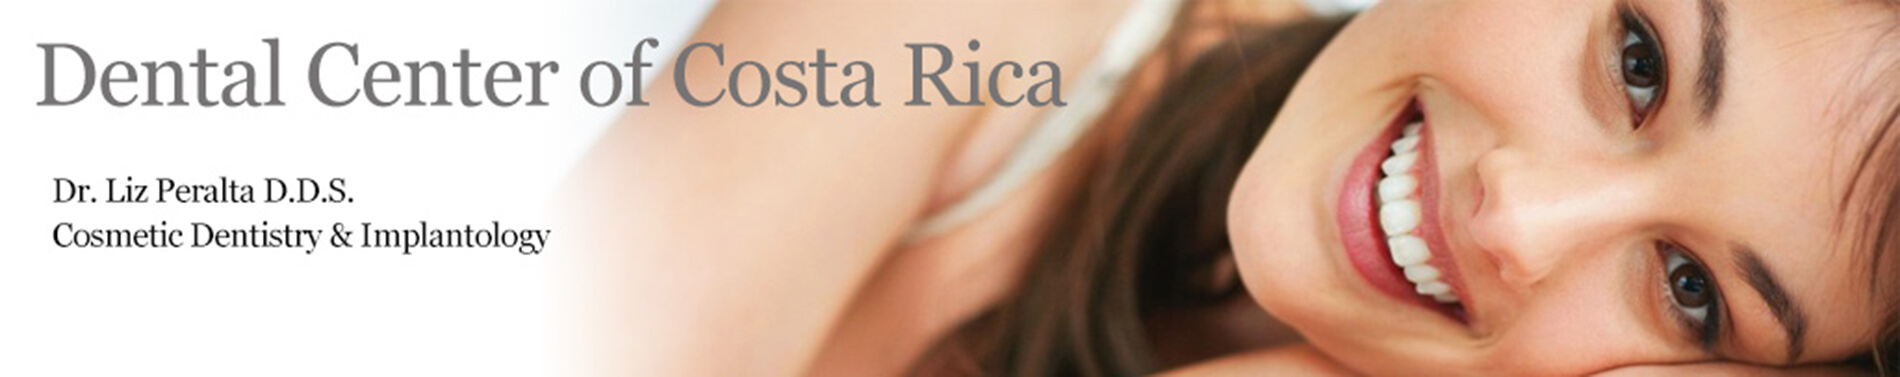 Banner featuring a portrait picture of a smiling woman with long brown hair happy with her Implantology procedure she had with the Dental Center of Costa Rica, San Jose, Costa Rica.